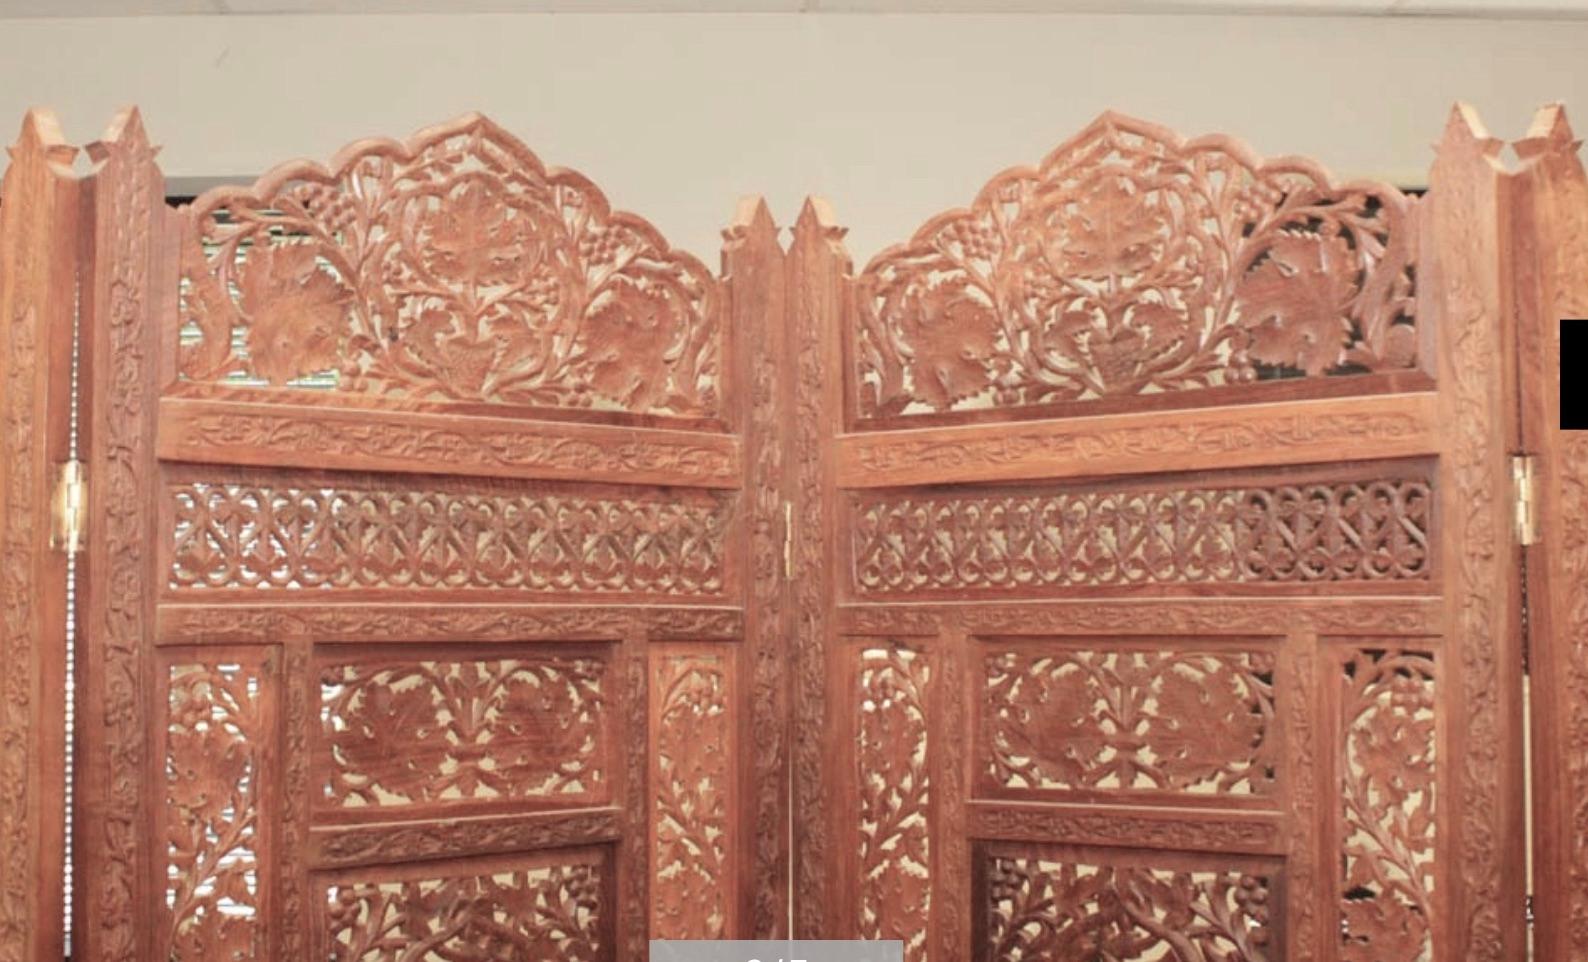 20th Century Anglo Indian 4-Panel Handcrafted Teak Wood Screen, Circa 1900s For Sale